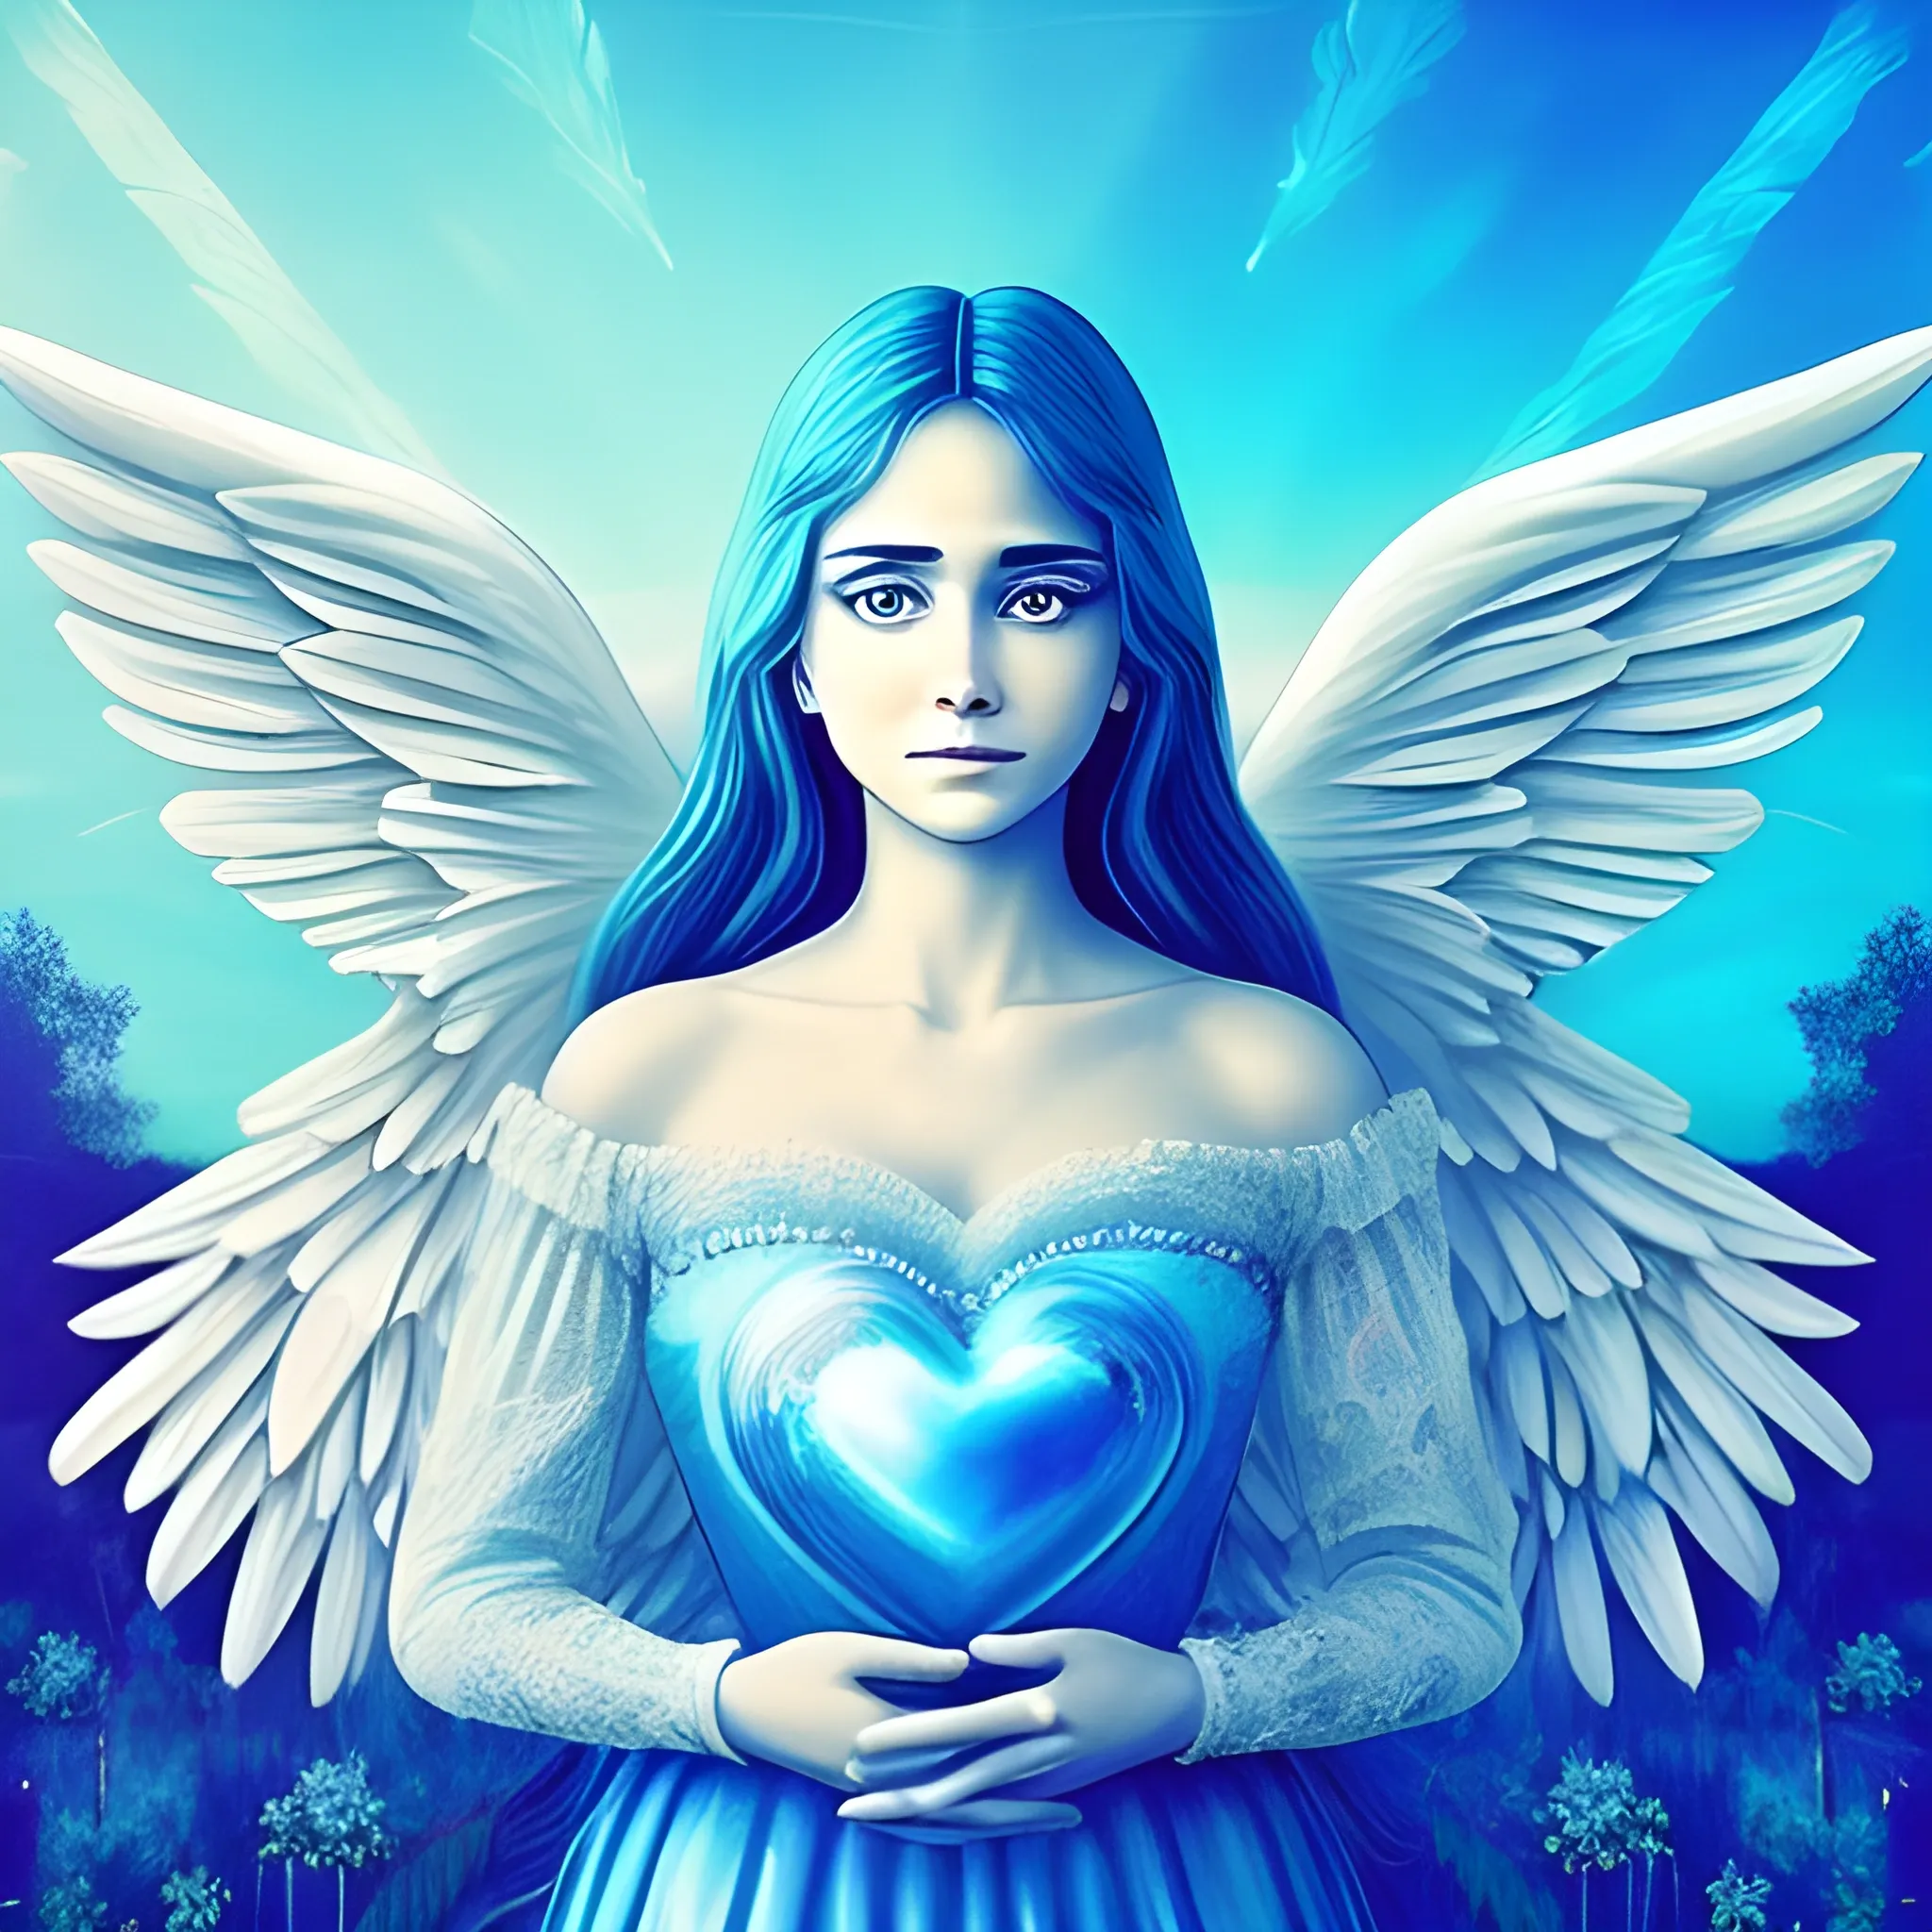 And, the next day, at the azure of a new day, my thoughts go out to you.
You, whom I dared not look at.
Yet your sky-clear eyes now haunt me!
Yet you are not the angel I love to whom I give my life in his hands and for his heart!, Trippy